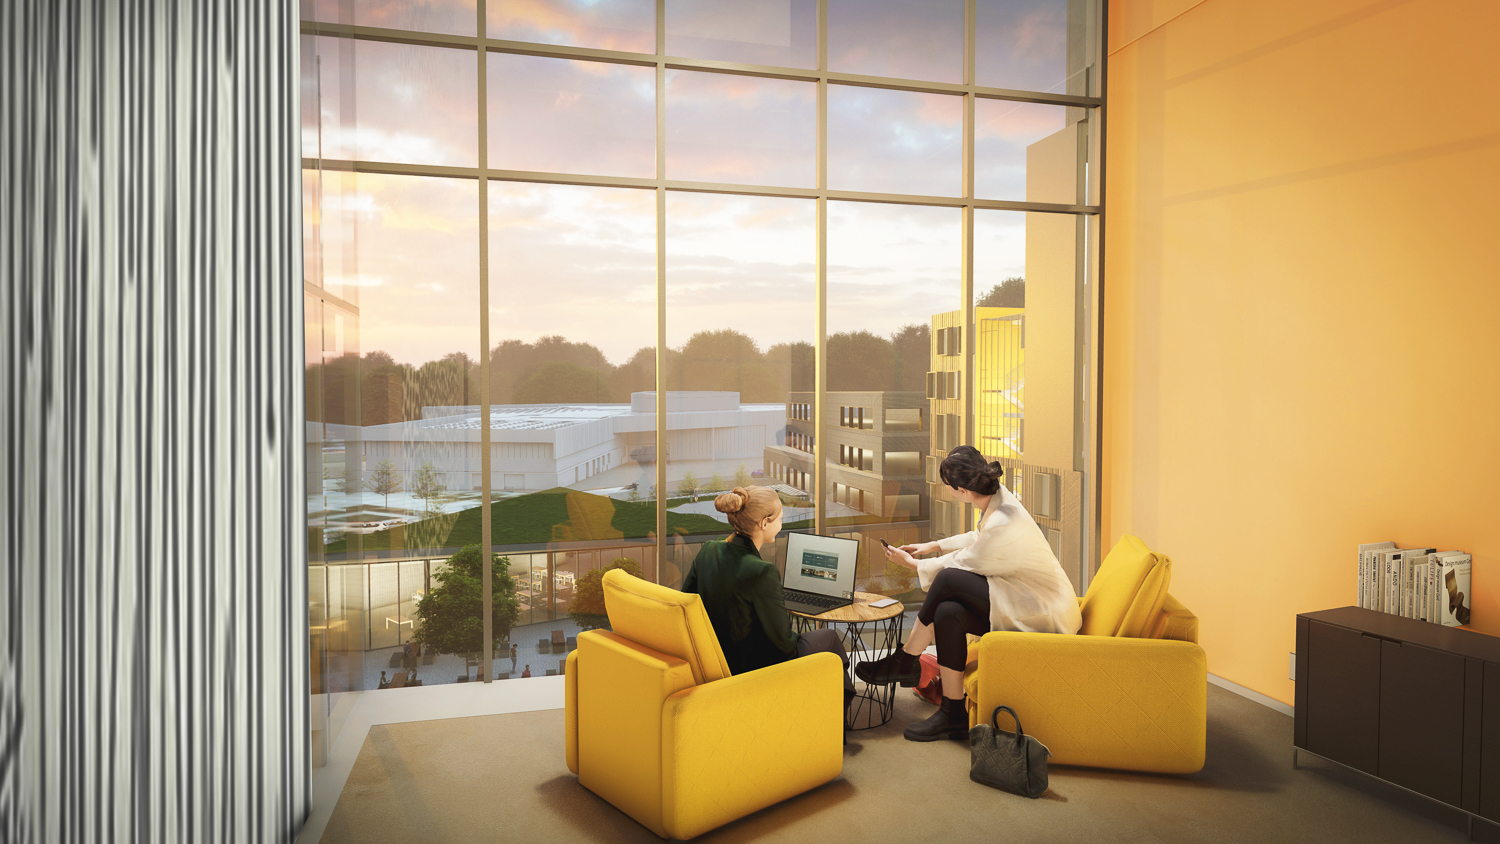 West Campus Green interior view, rendering by EHDD